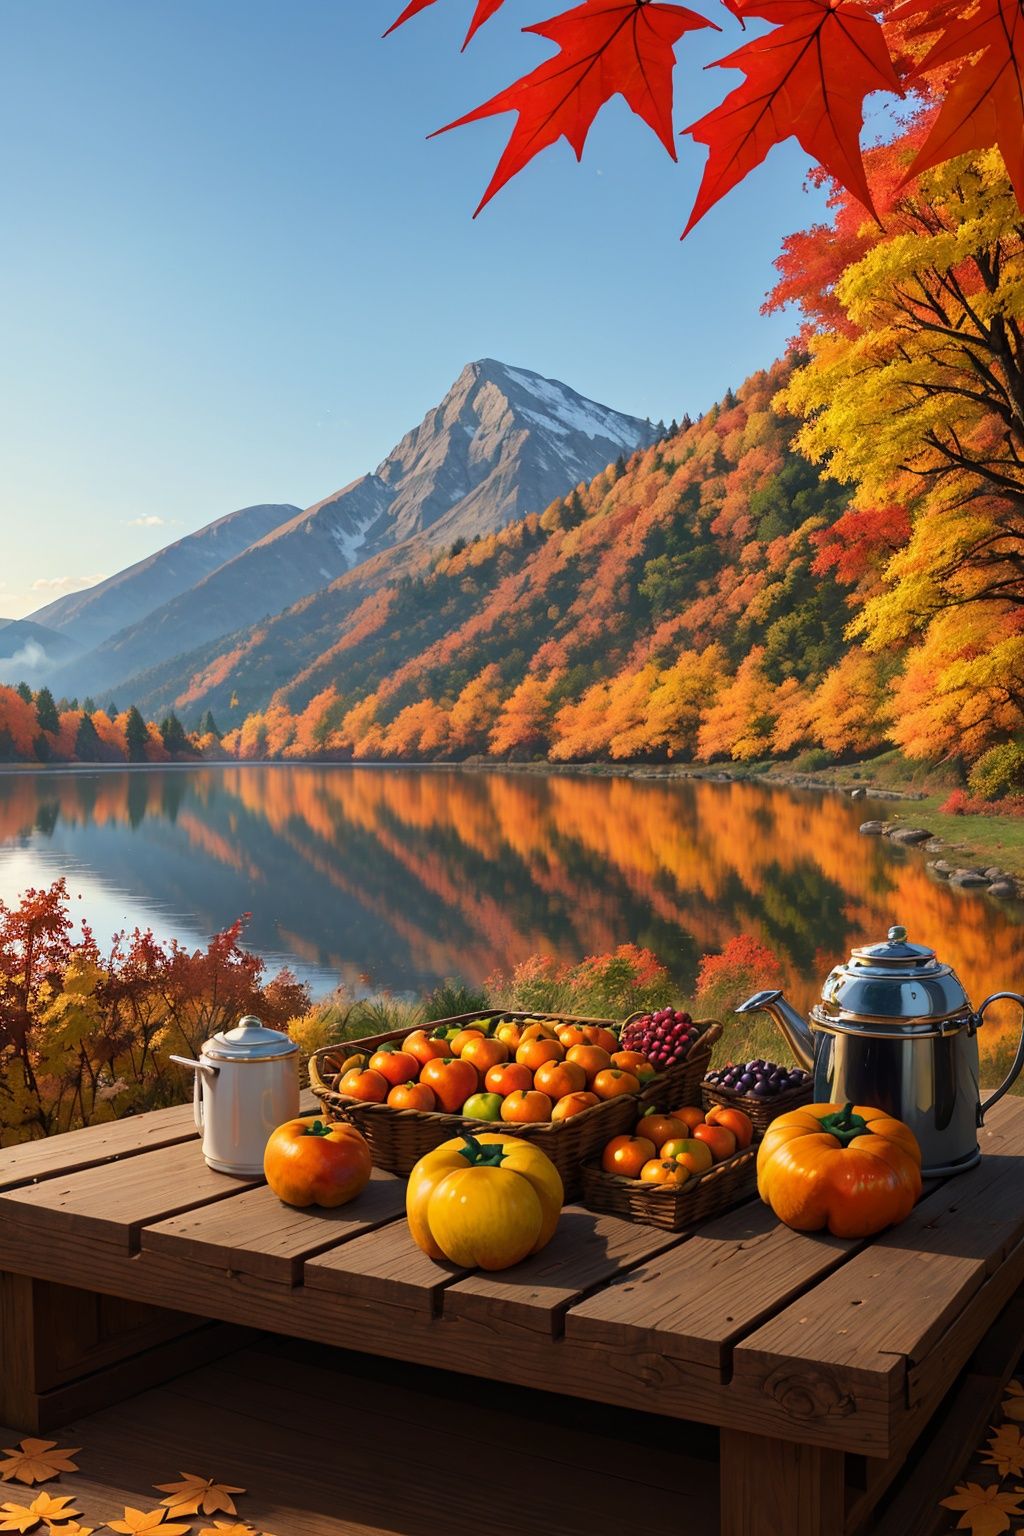 morning dew in autumn, maple leaves, serene lake surface, mountains, open-air cafe, cabin, campfire, fishing, mountain trails, autumn wedding,golden autumn leaves, autumn colors, autumn breeze, wisps of smoke, dew, autumn scenery, harvest season, warm sunlight, persimmons, grapes, ripe fruits, 